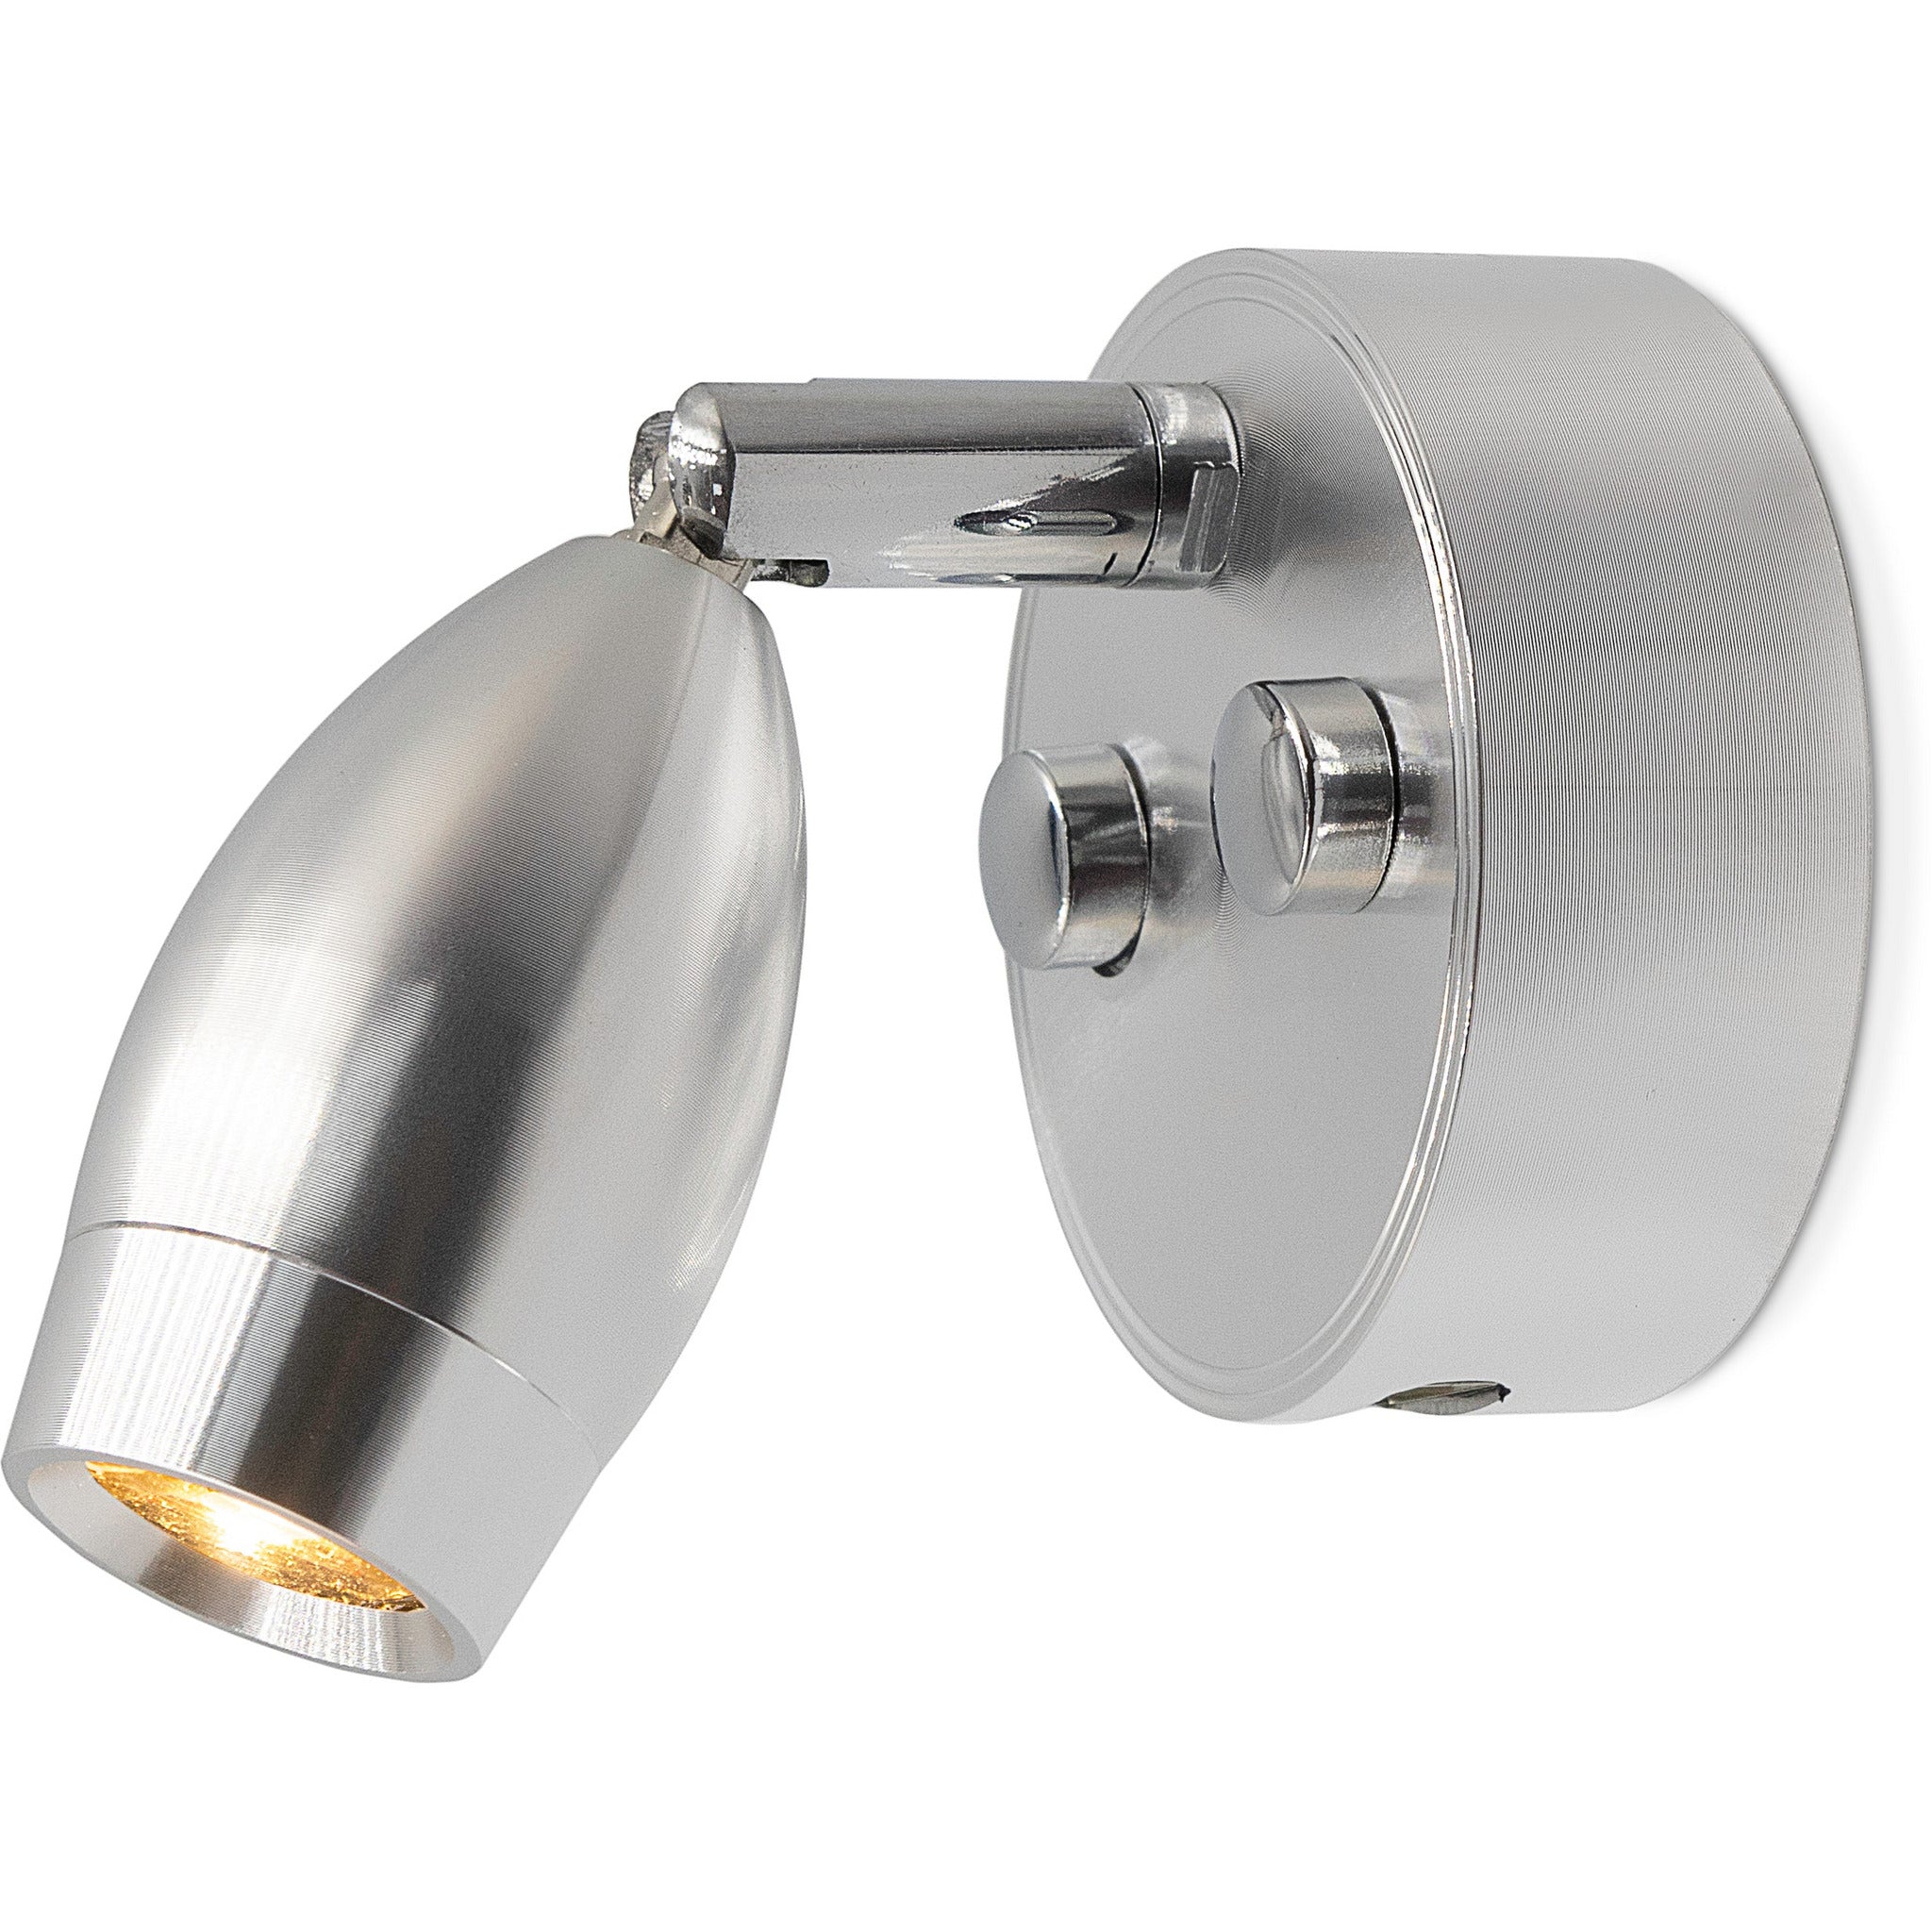 Silver LED 300mm Spotlight with USB - Dimmable, Touch On/Off (Warm White) Kiravans 